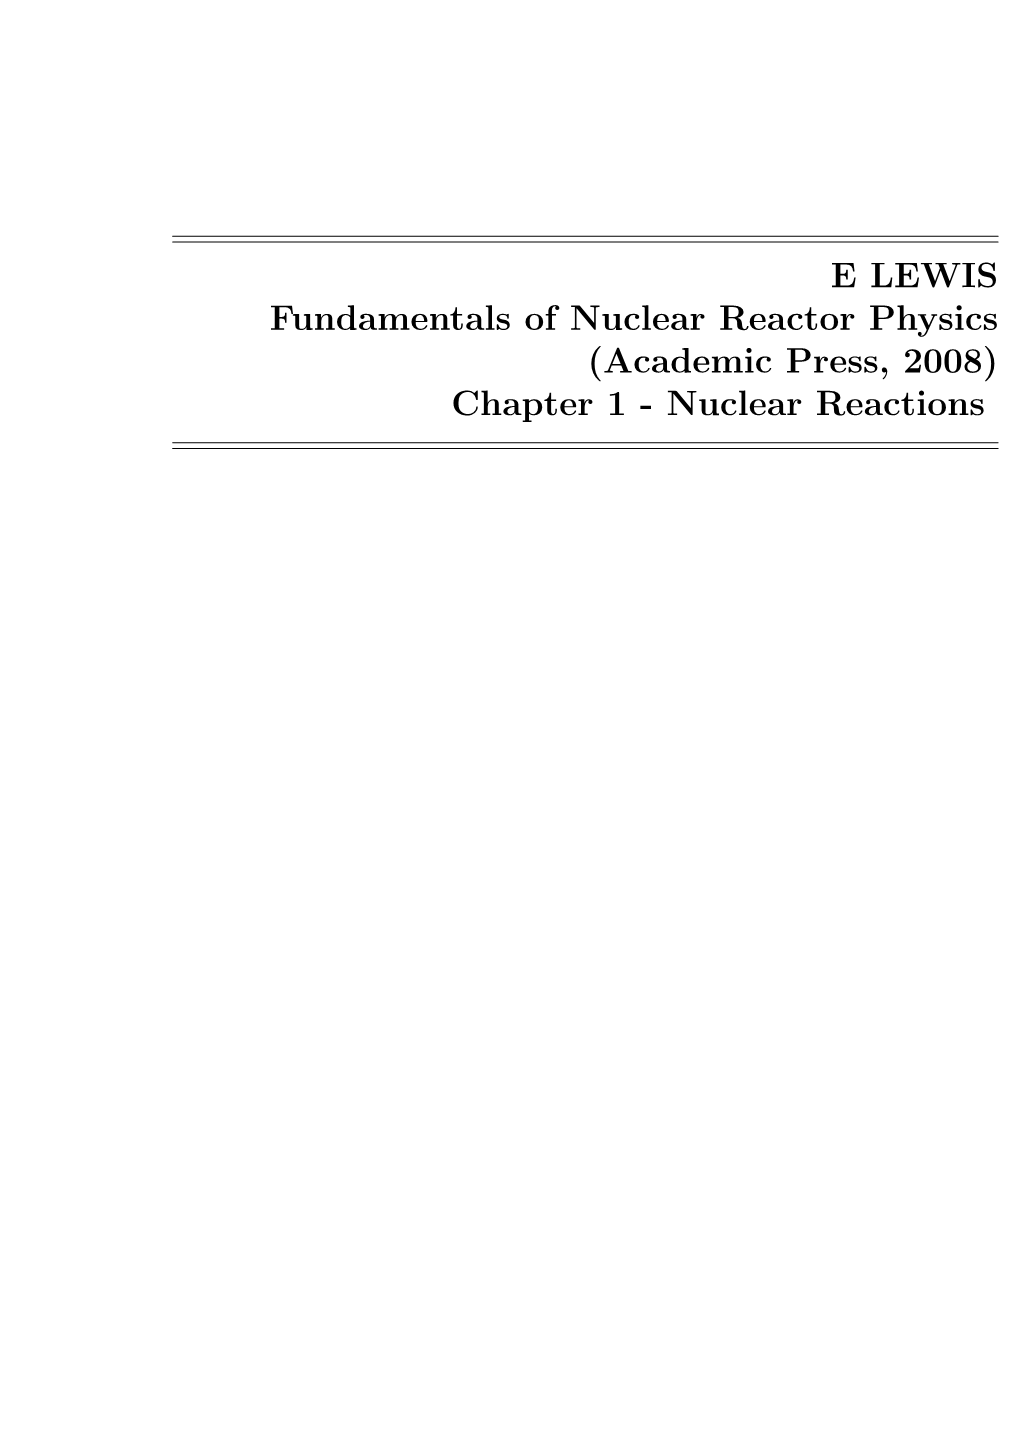 E LEWIS Fundamentals of Nuclear Reactor Physics (Academic Press, 2008) Chapter 1 - Nuclear Reactions